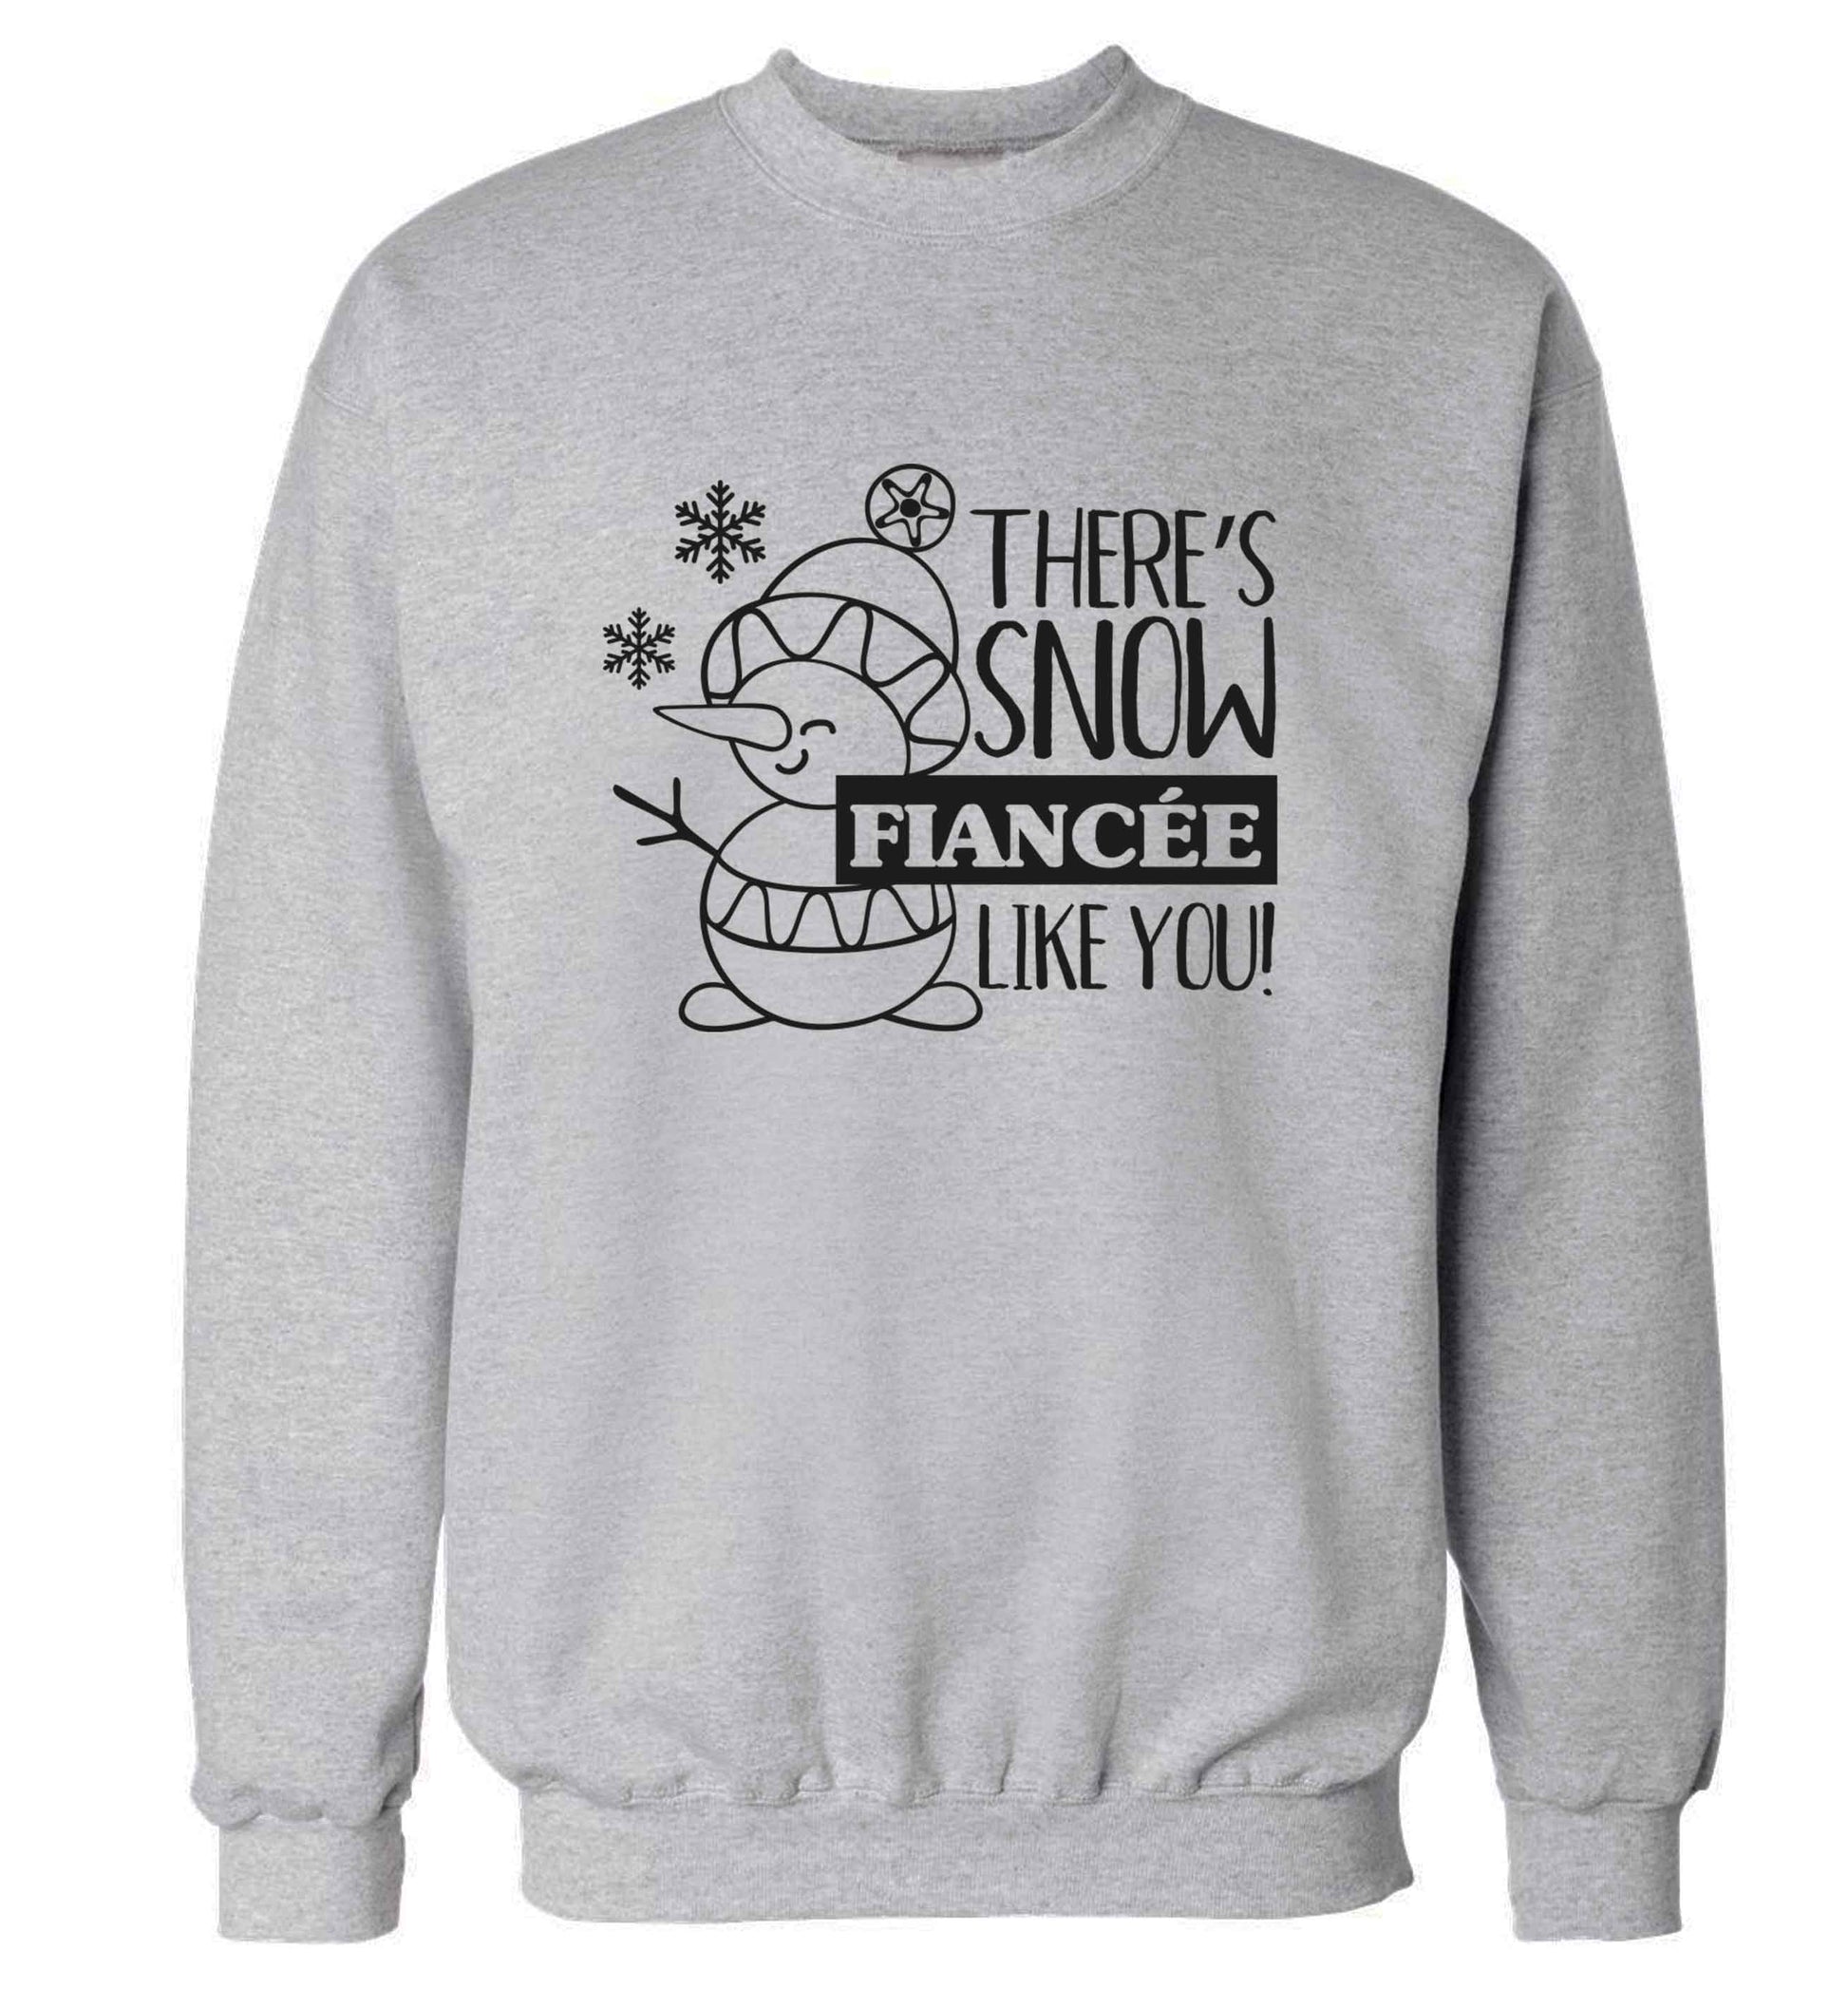 There's snow fiancee like you adult's unisex grey sweater 2XL